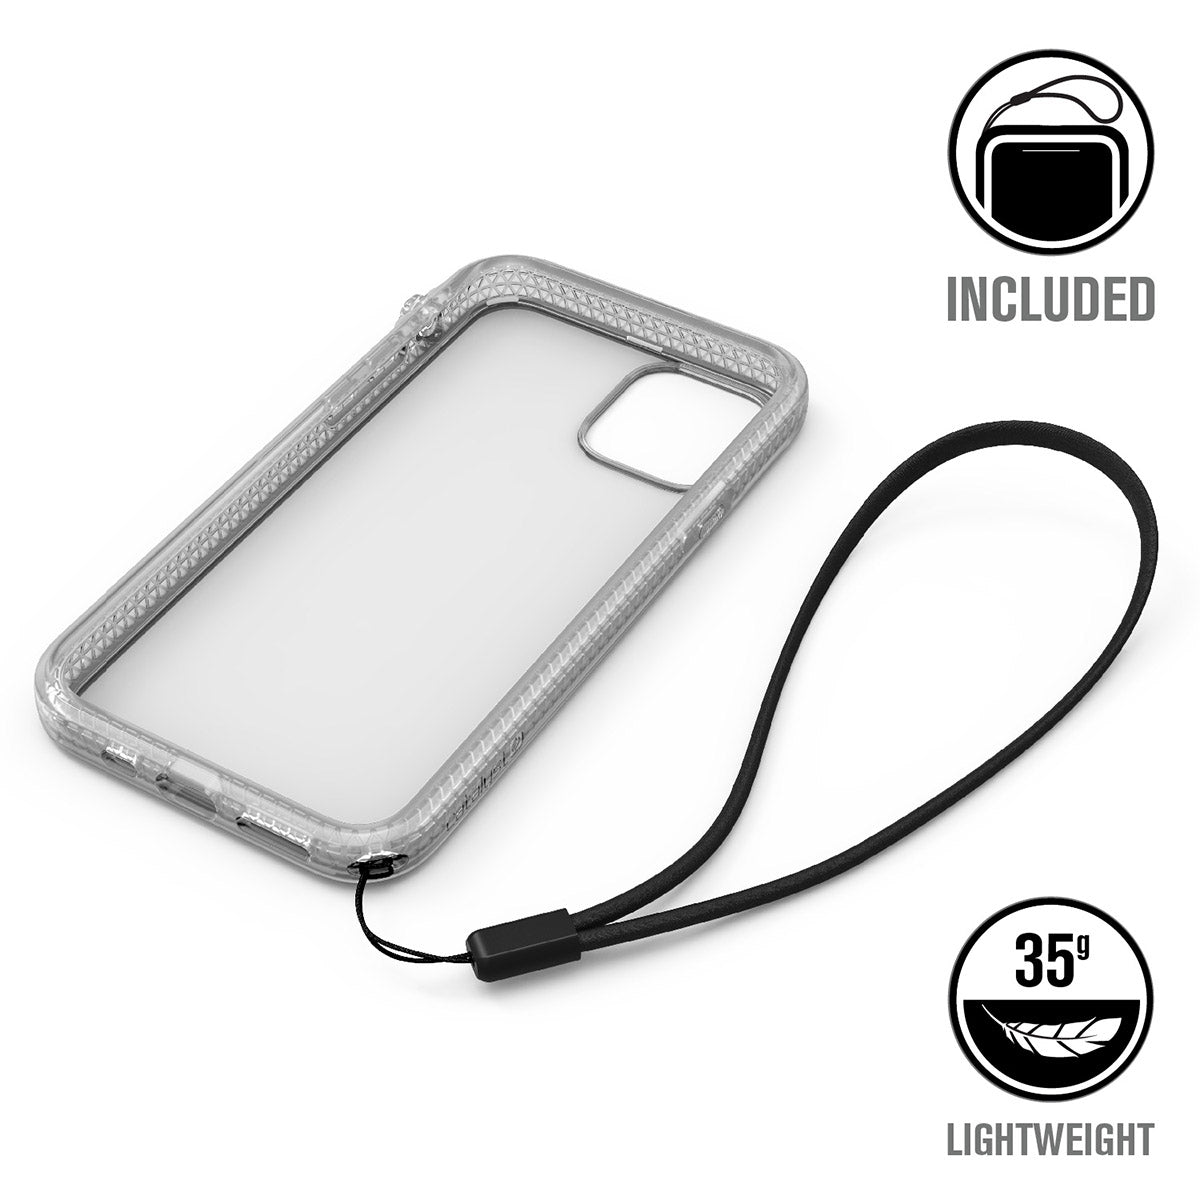 catalyst iPhone 11 series impact protection case empty clear case for iPhone 11 pro with a lanyard text reads included 35g lightweight